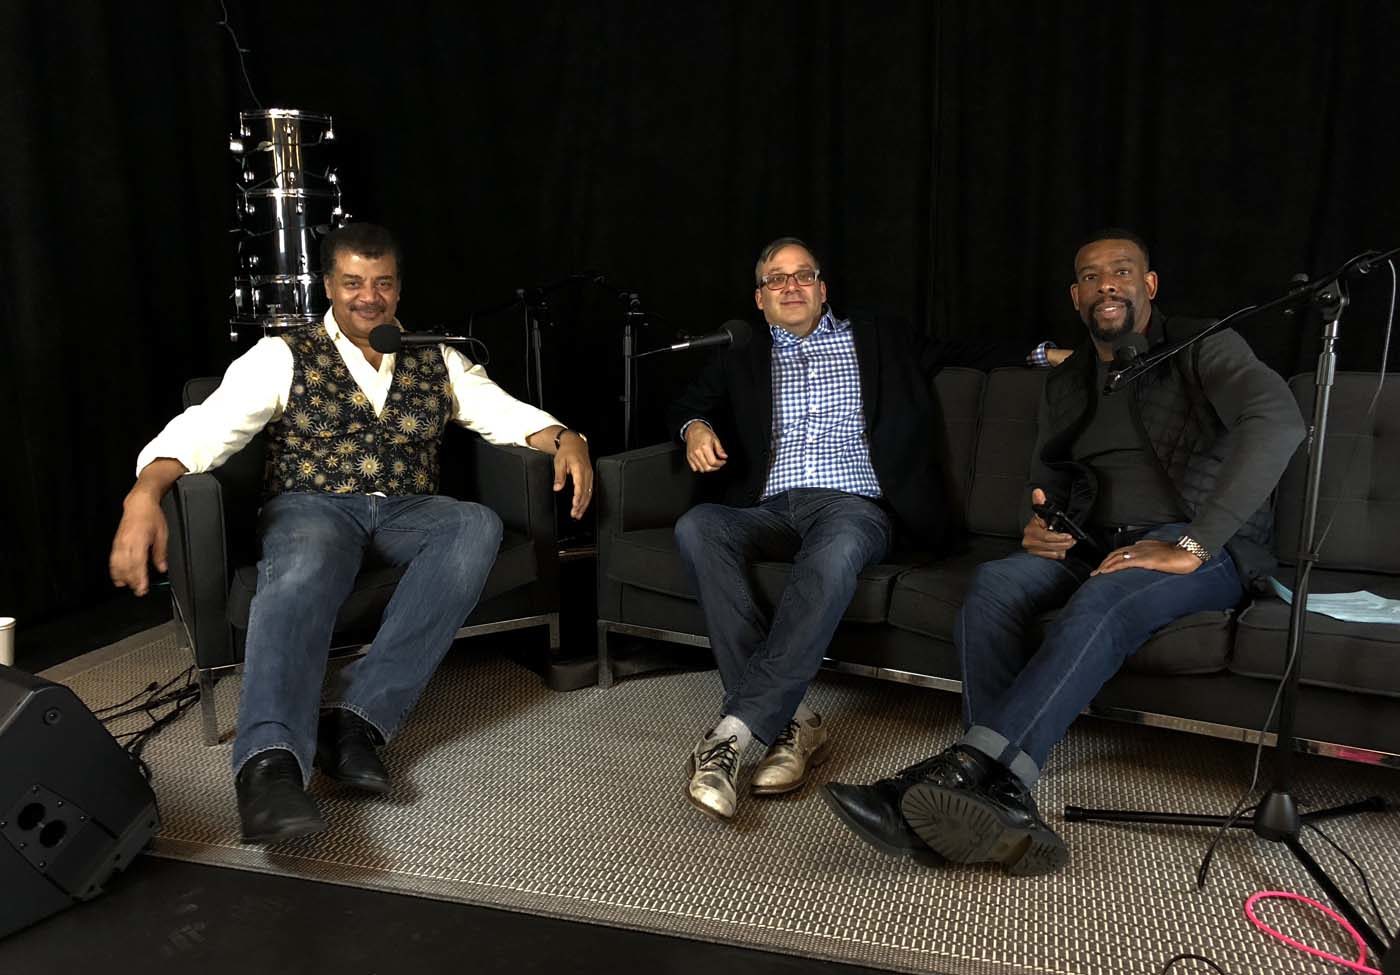 Ben Ratner's photo of Neil deGrasse Tyson, Gary Marcus and Chuck Nice.